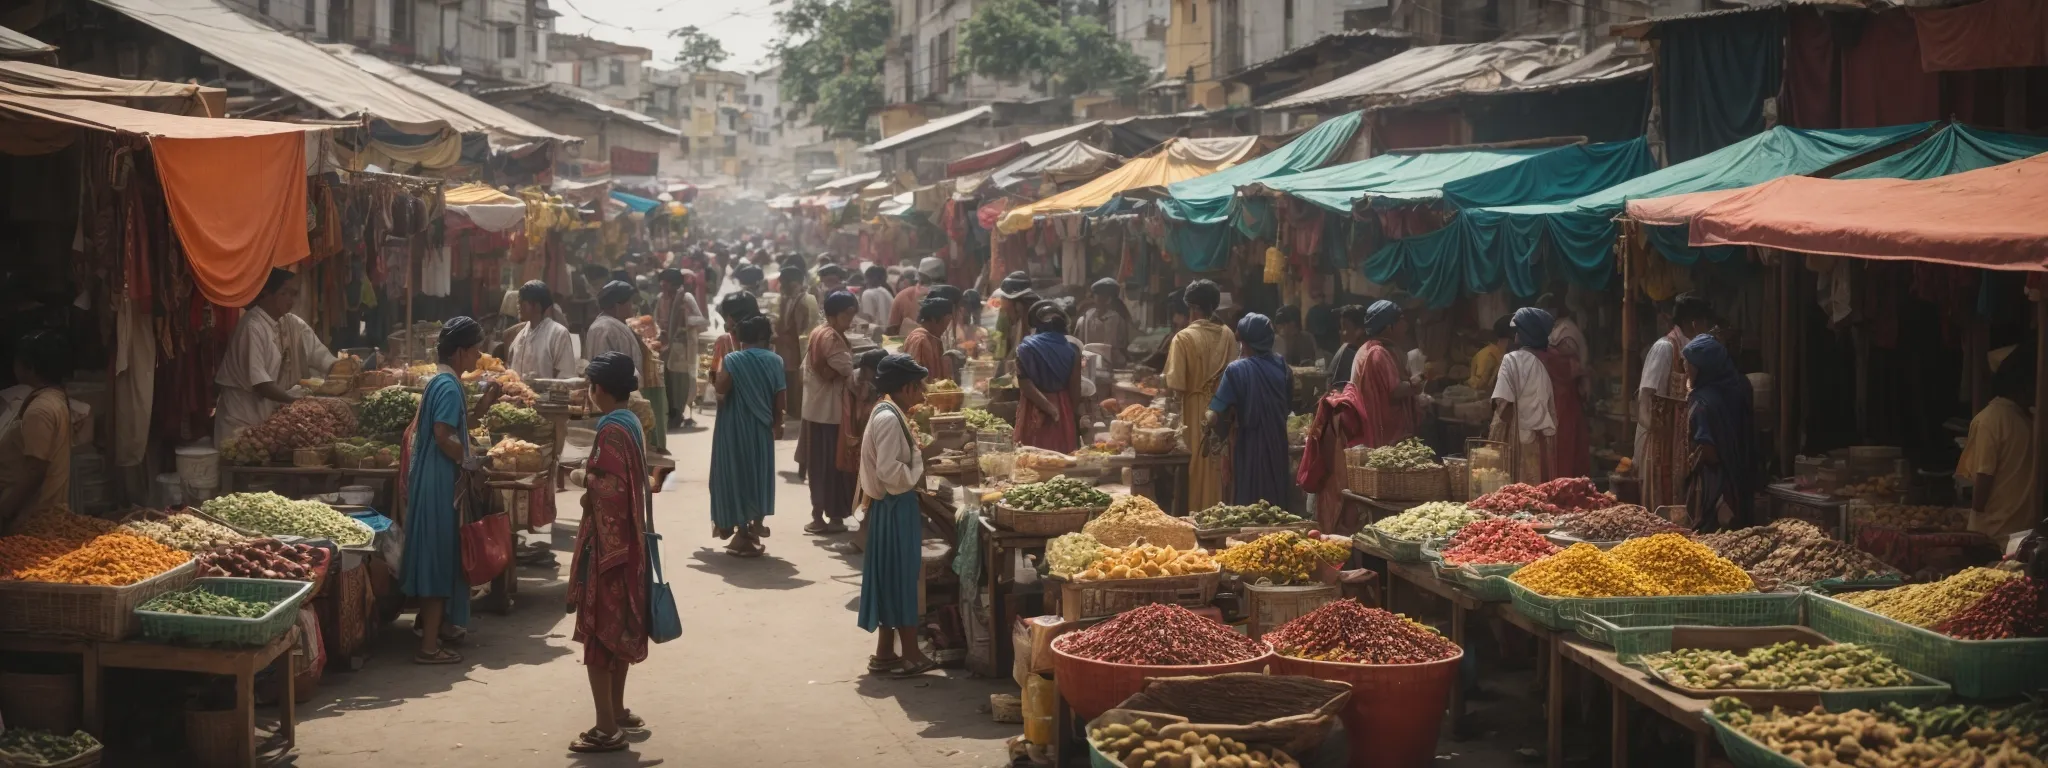 a bustling local market scene where vendors and customers interact amid colorful stalls, embodying community engagement.